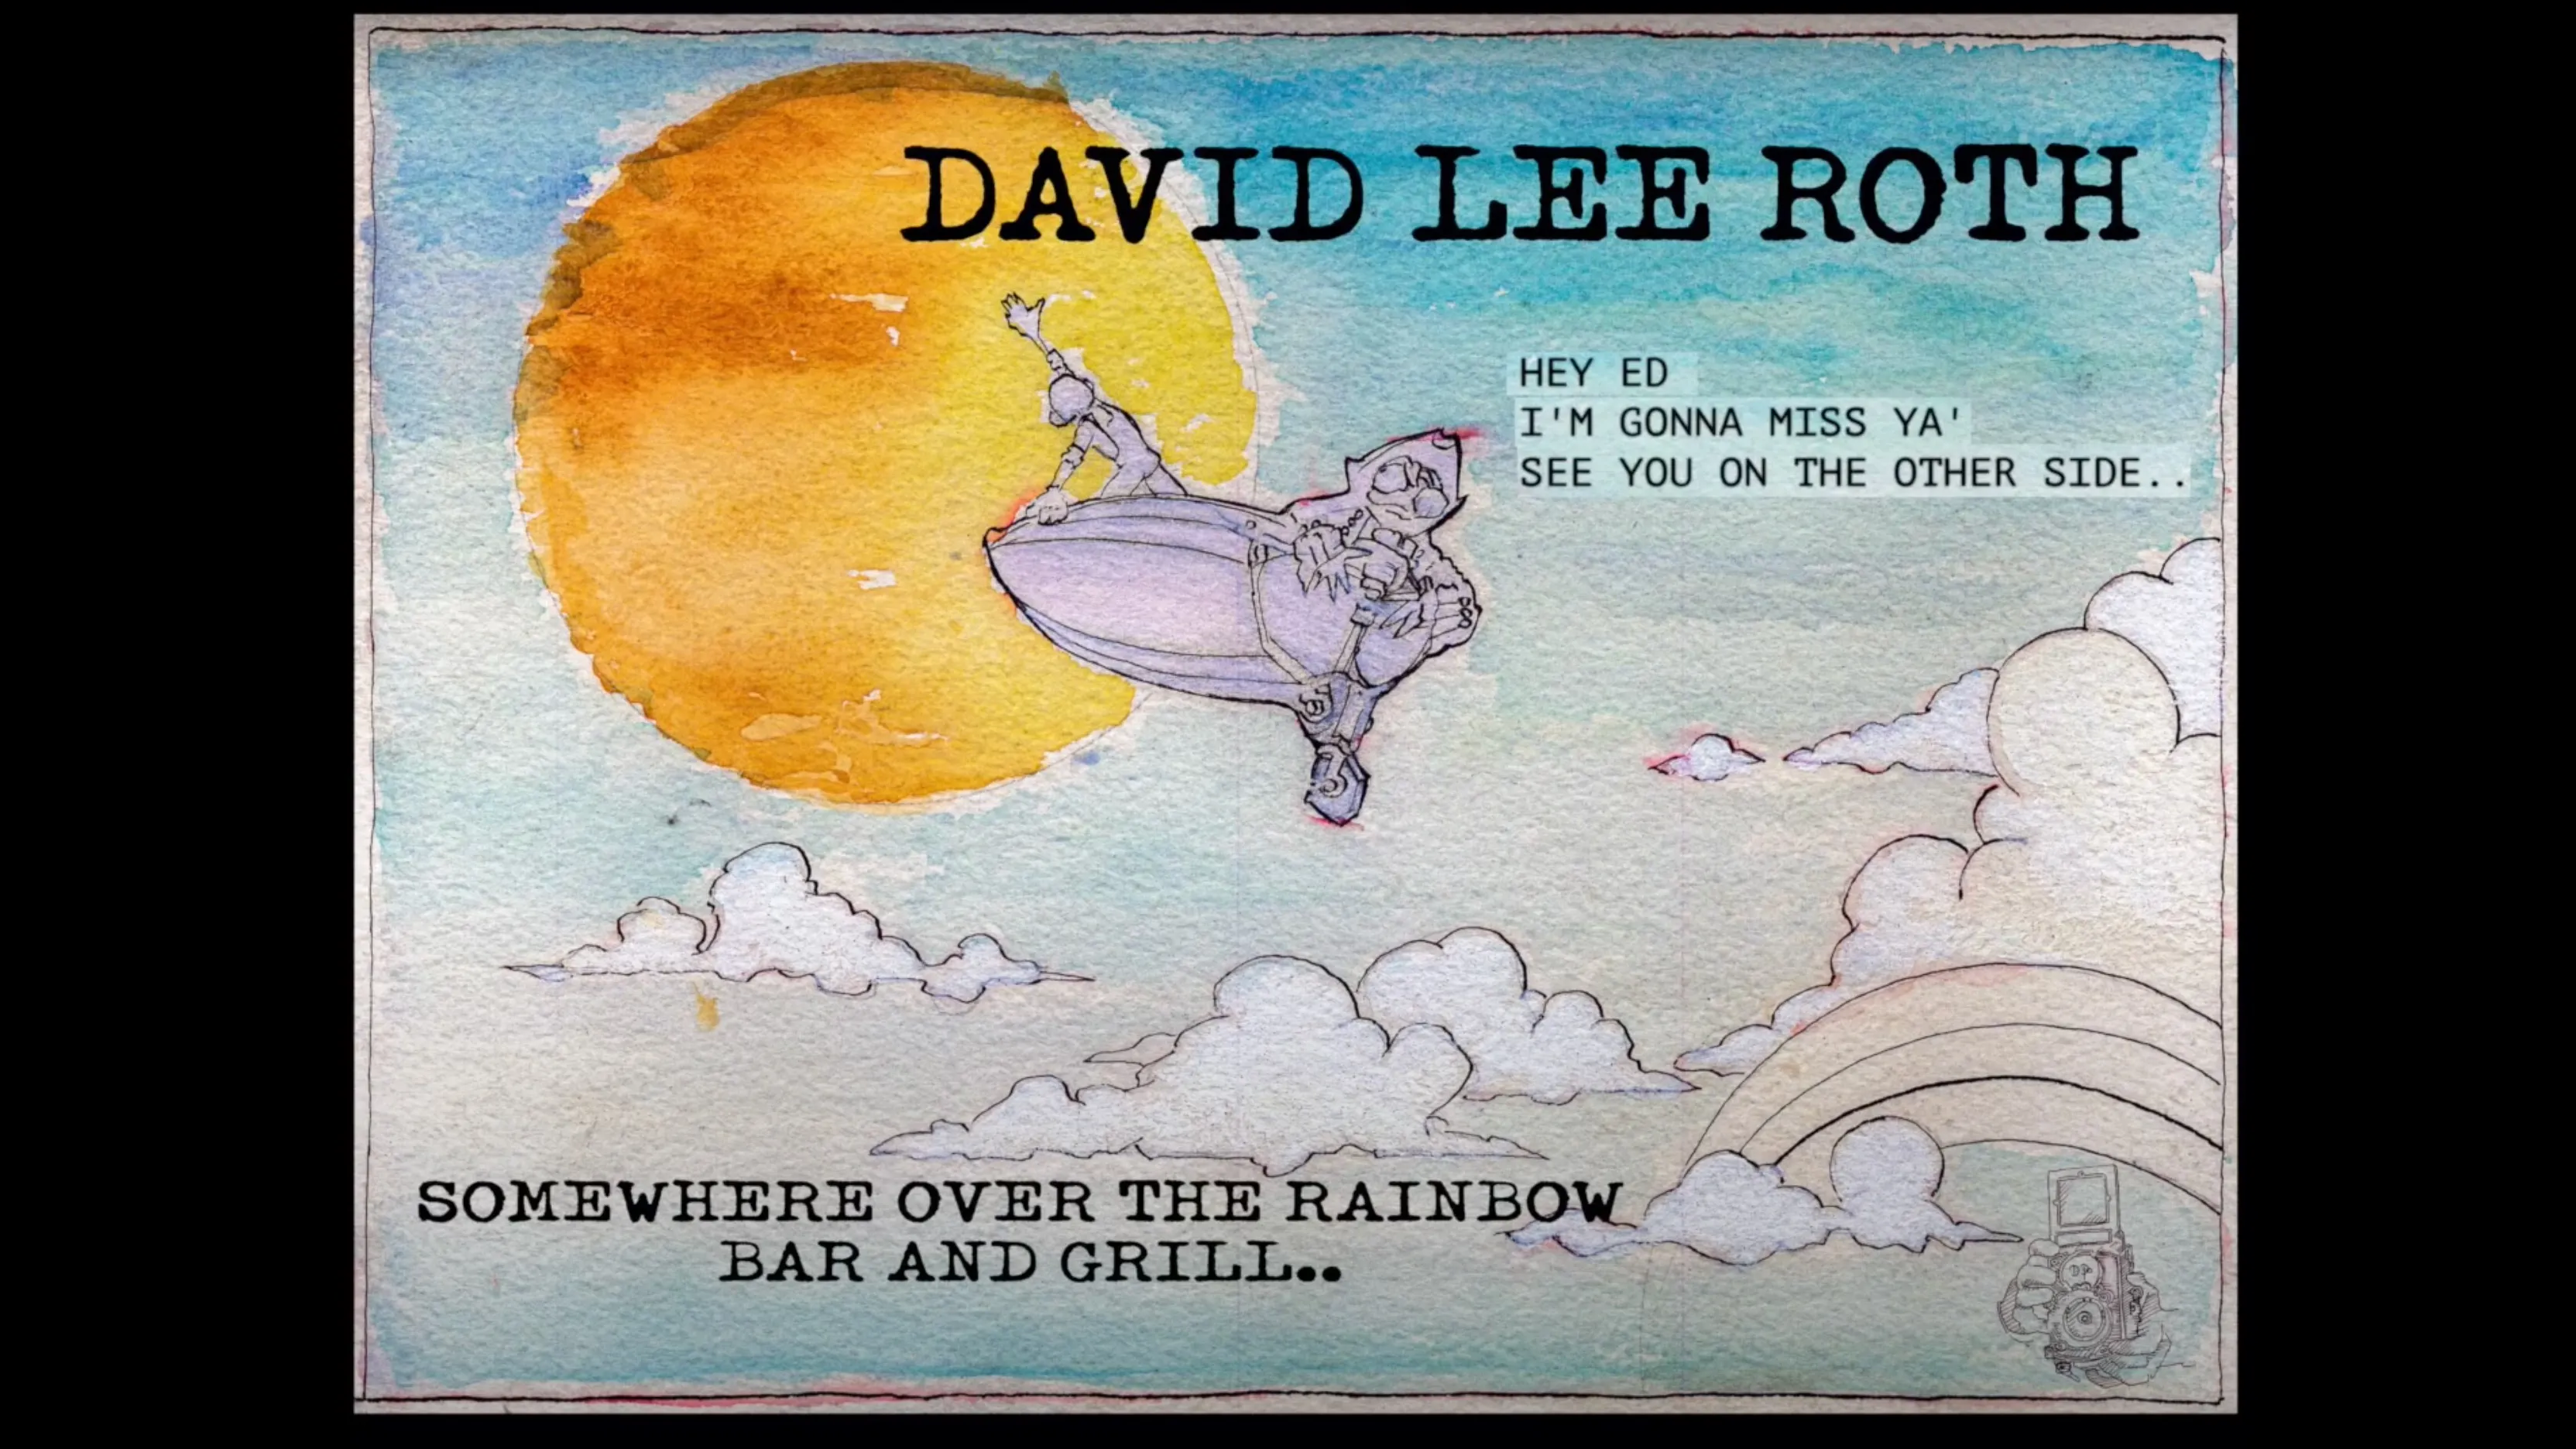 David Lee Roth Dedicates New Song To Eddie Van Halen: ‘Somewhere Over The Rainbow Bar And Grill’